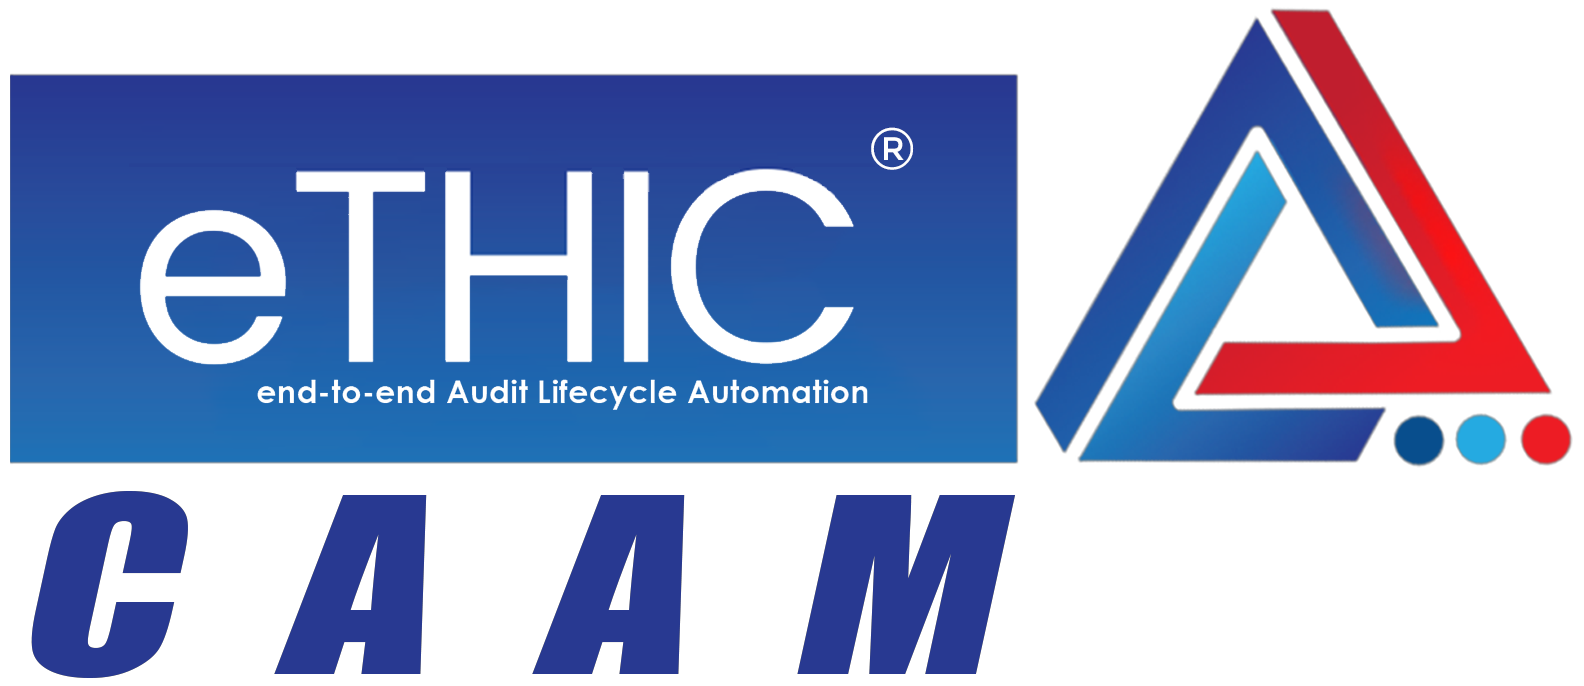 eTHIC Best Audit Software in India. eTHIC is India's no.1 Audit platform by NCS SoftSolutions, Audit Software, Risk Software